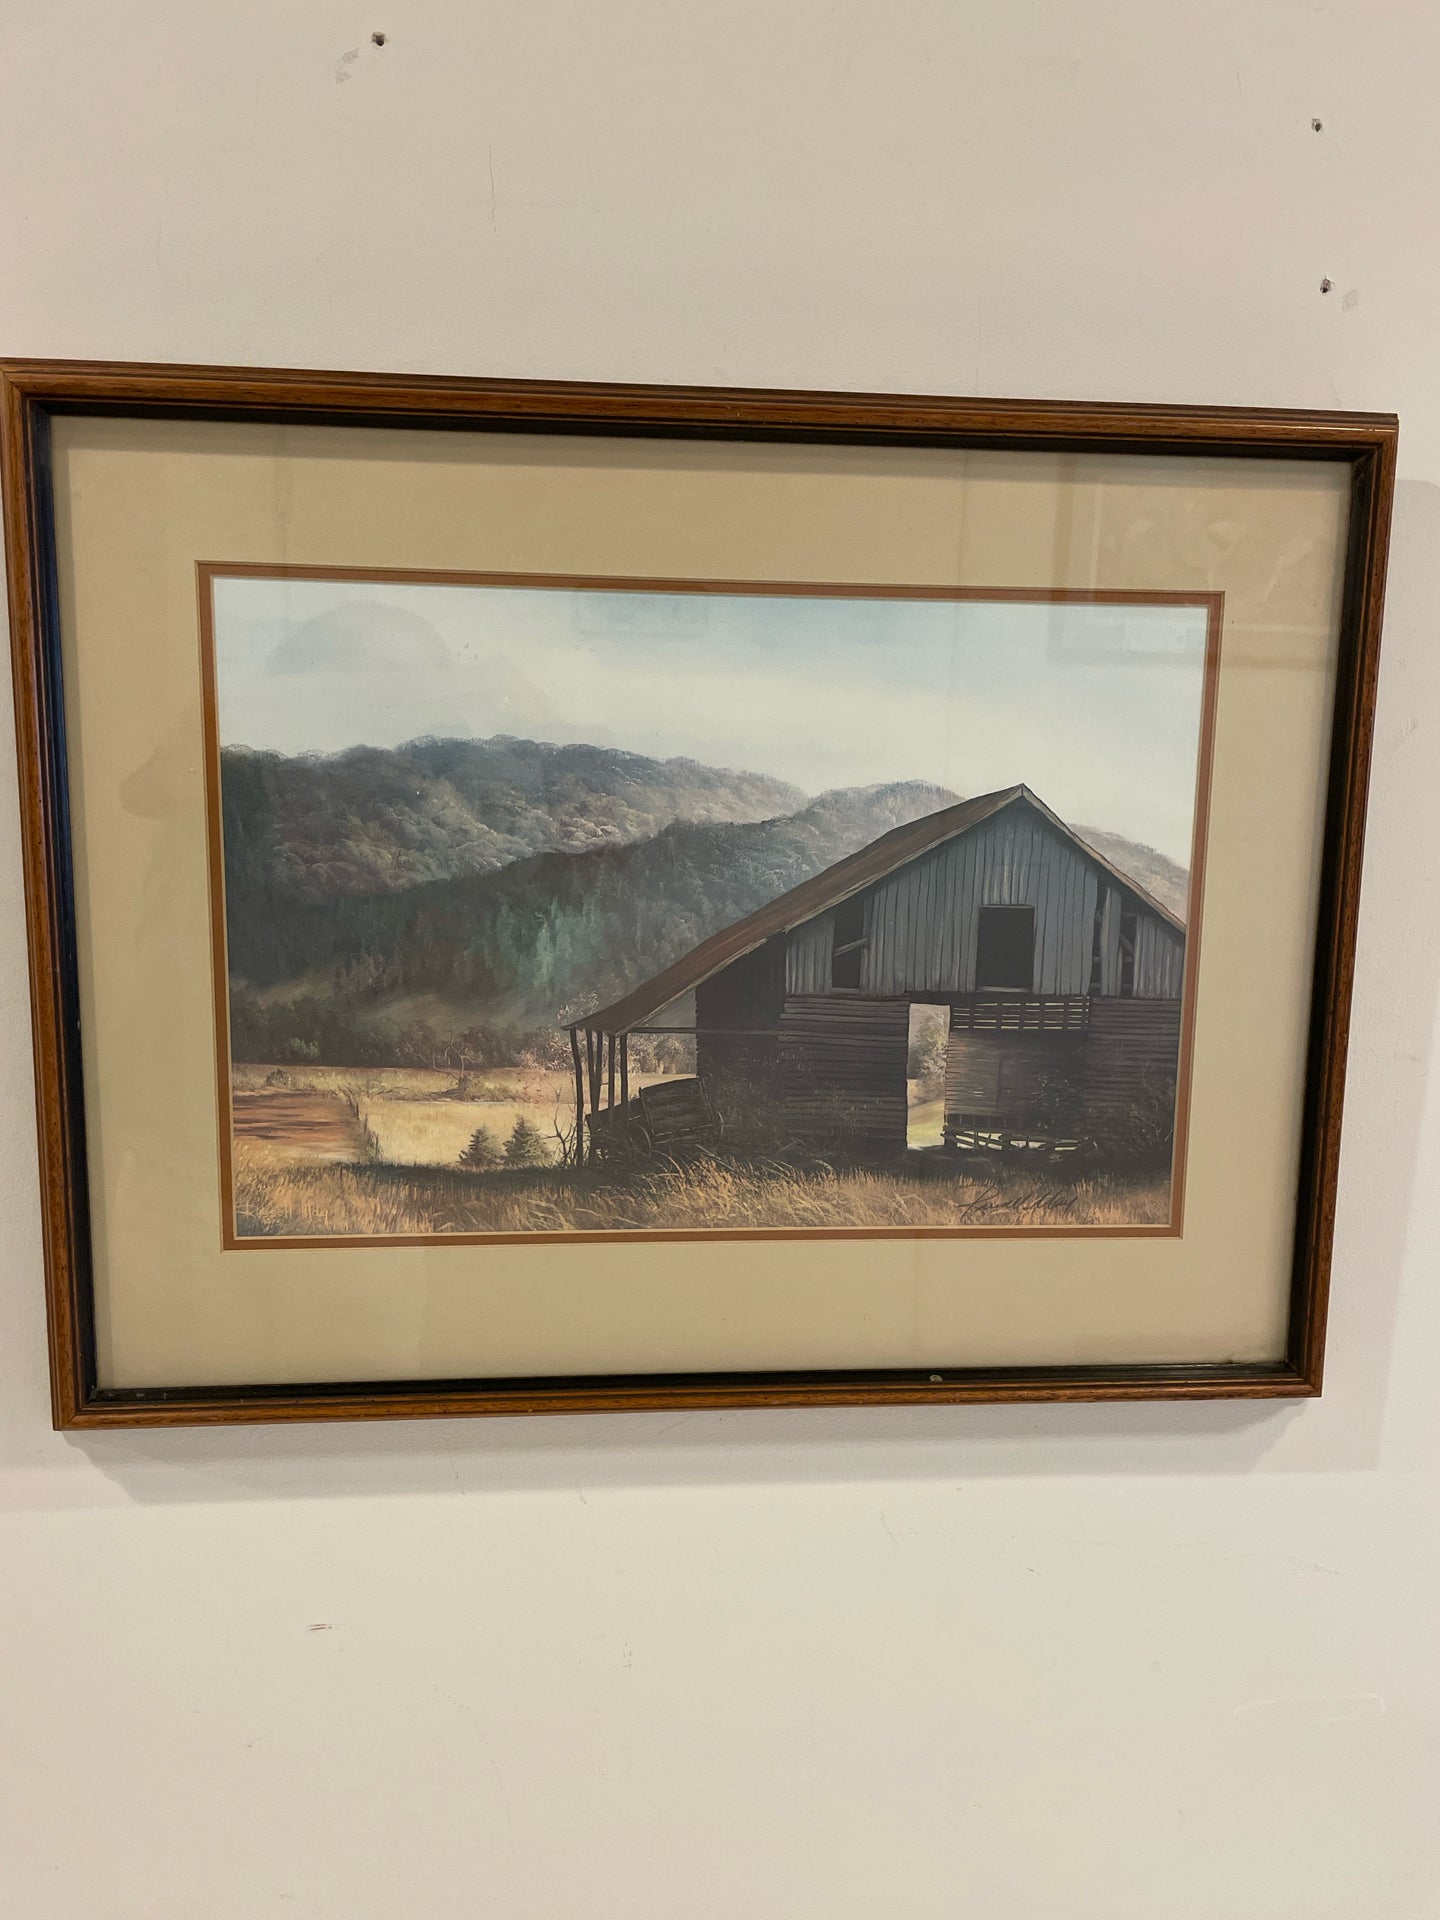 Framed Print of Barn and Mountains by Russell May, signed